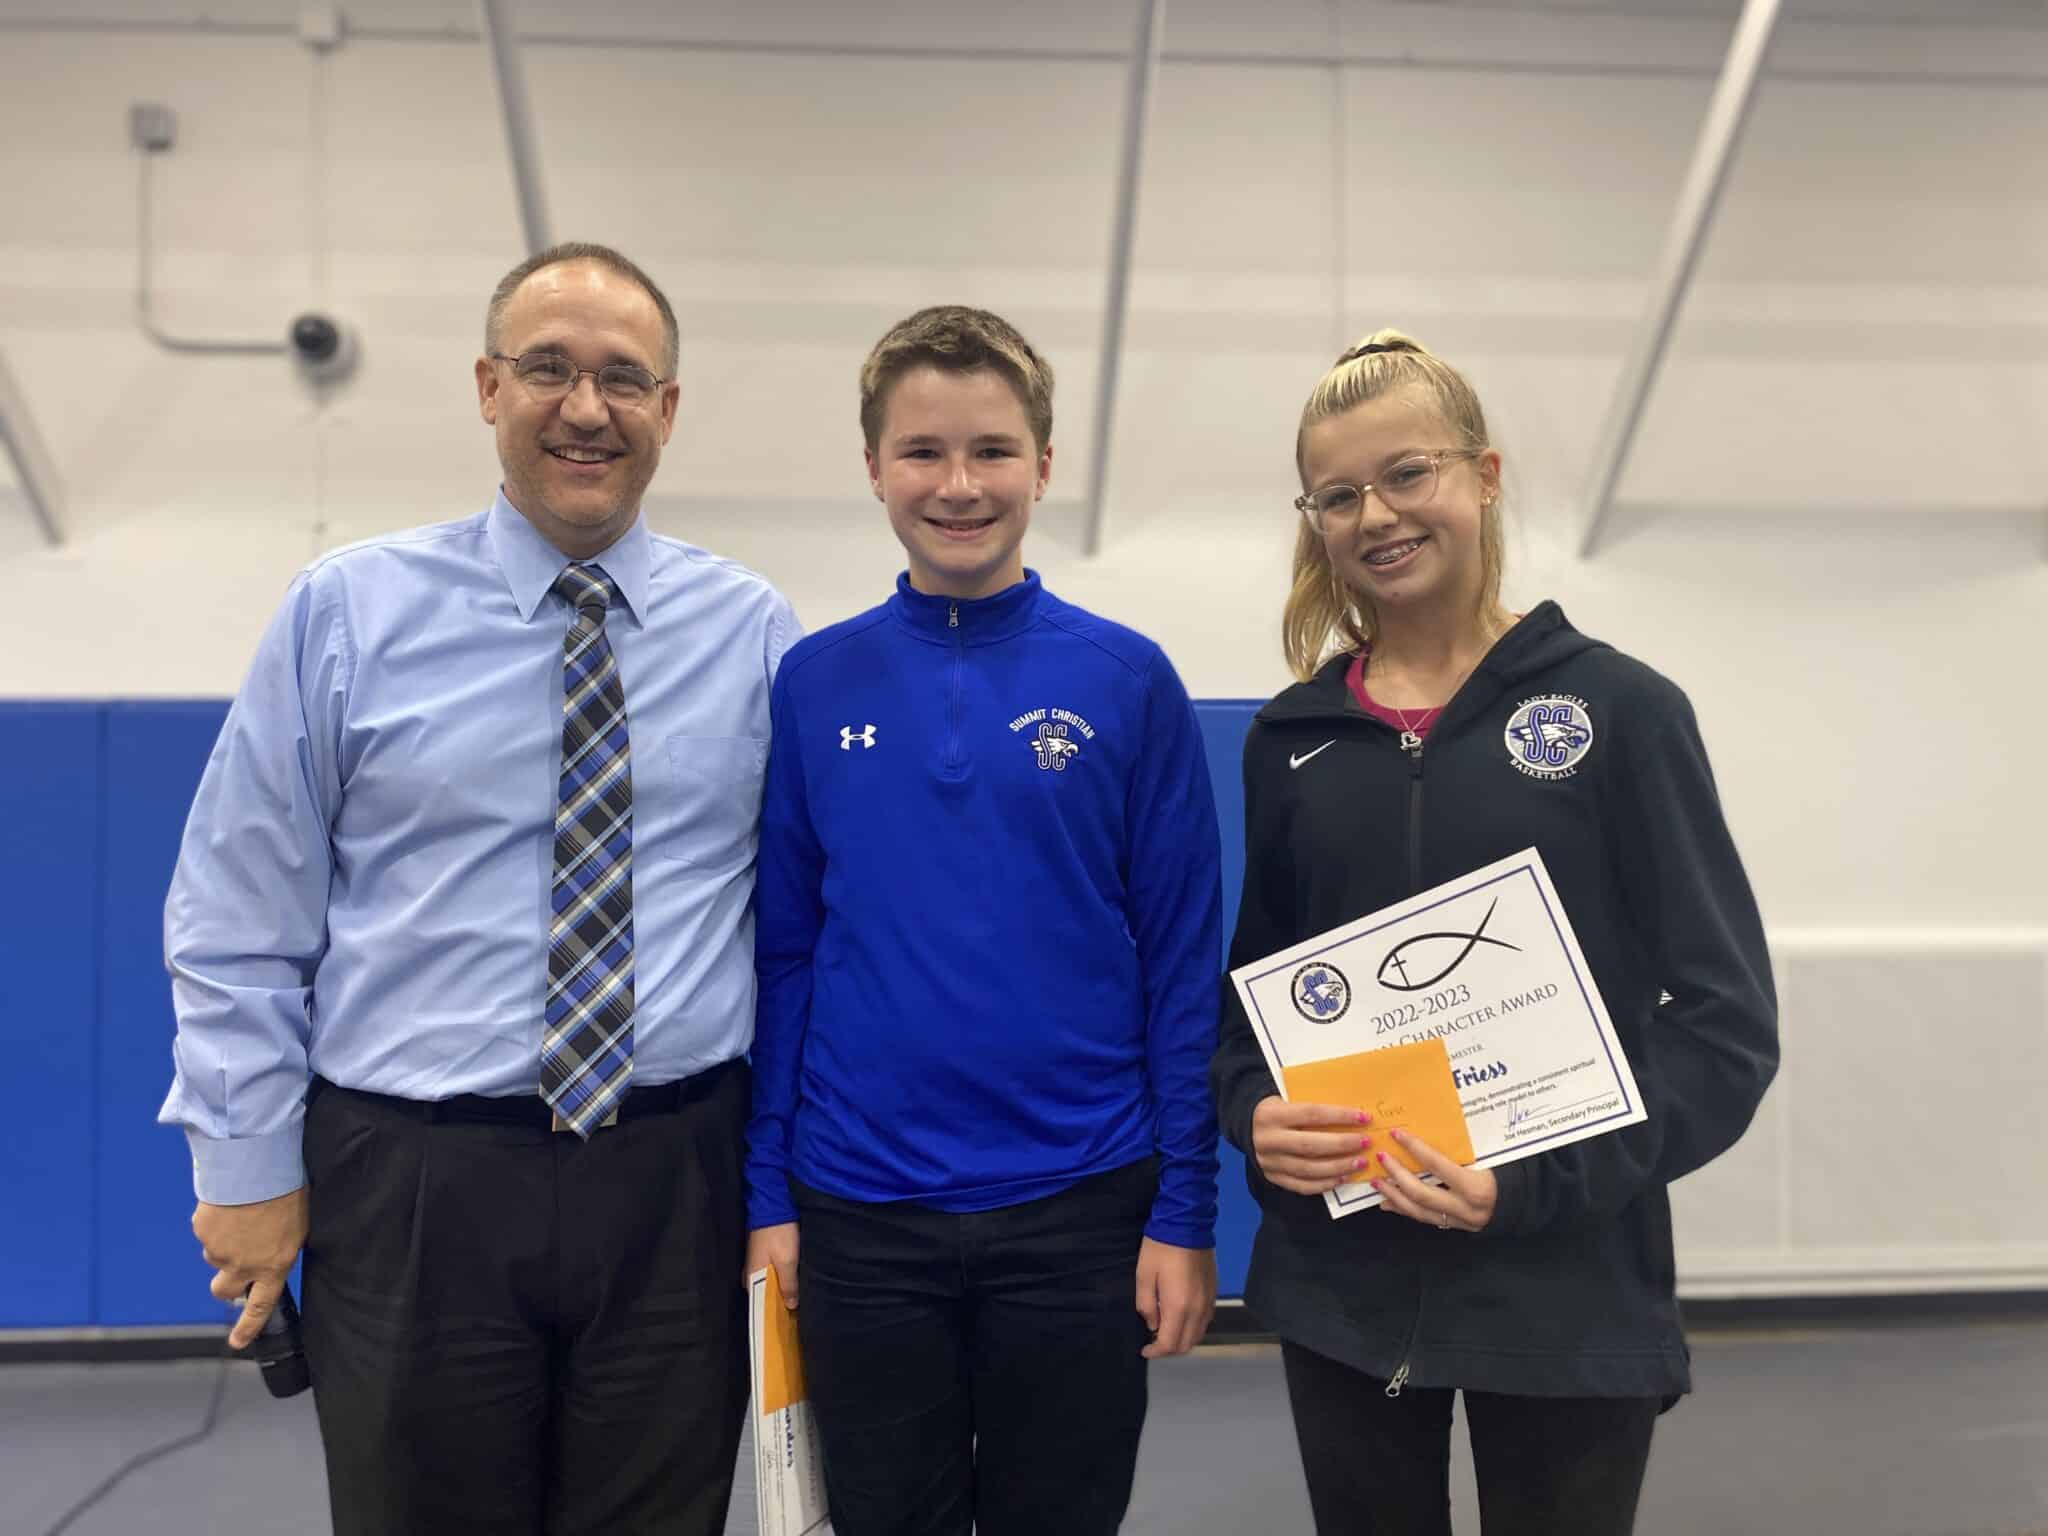 SCA presented the Junior High Christian Character award winners for second semester recently at an awards assembly. SCA Secondary Assistant Principal Joe Hesman with SCA seventh grade student Ethan Sanders and SCA eighth grade student Rylie Friess.